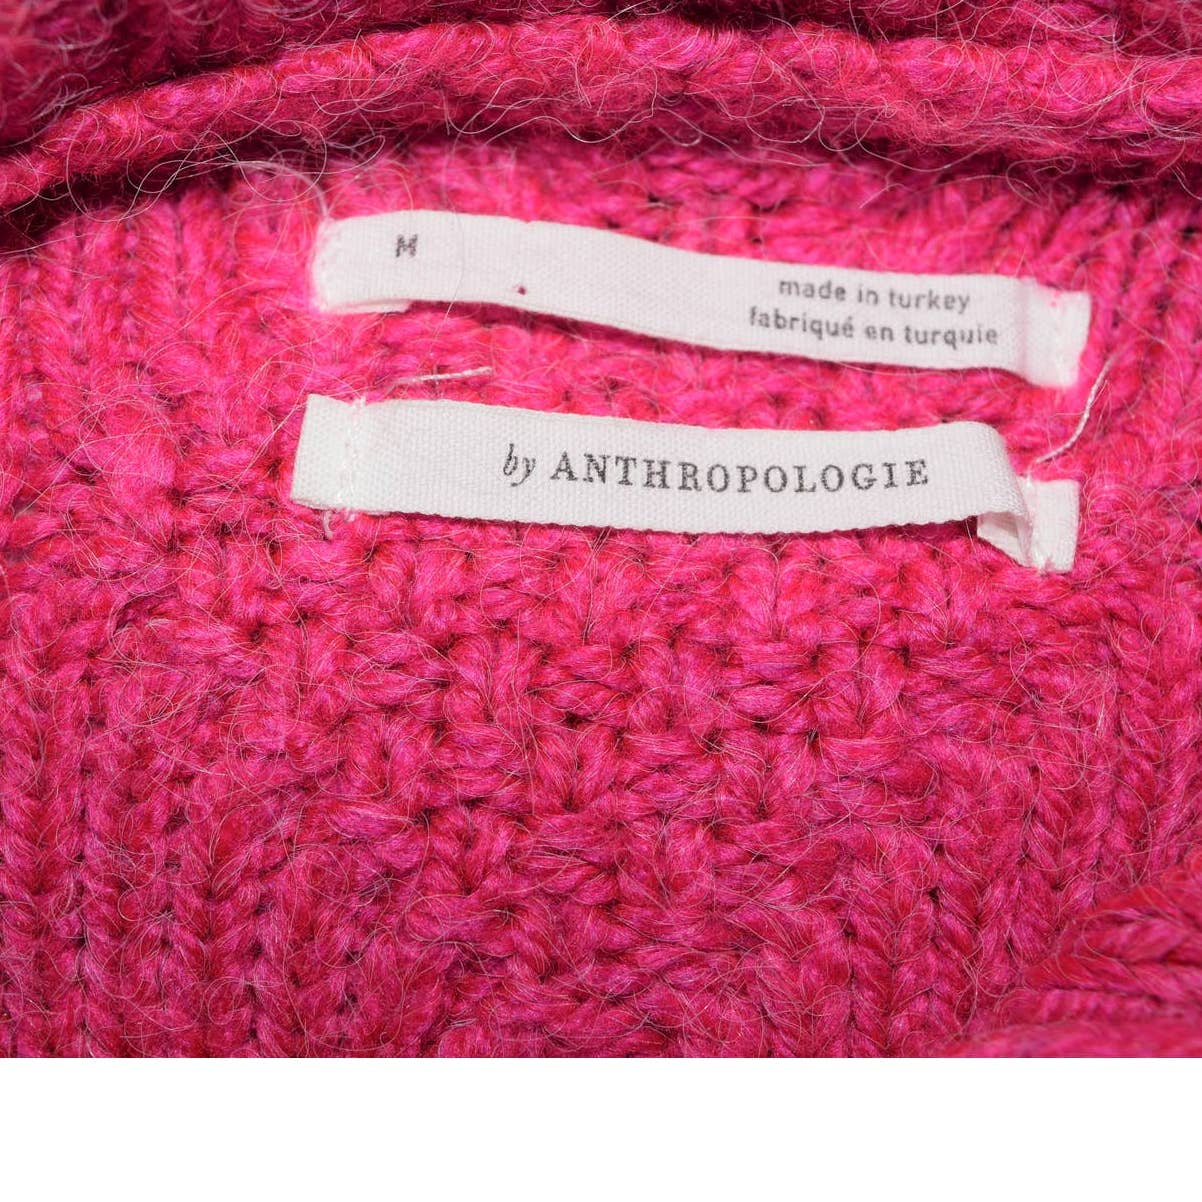 Anthropologie Pink Zip Up Cable Knit Sweater - M